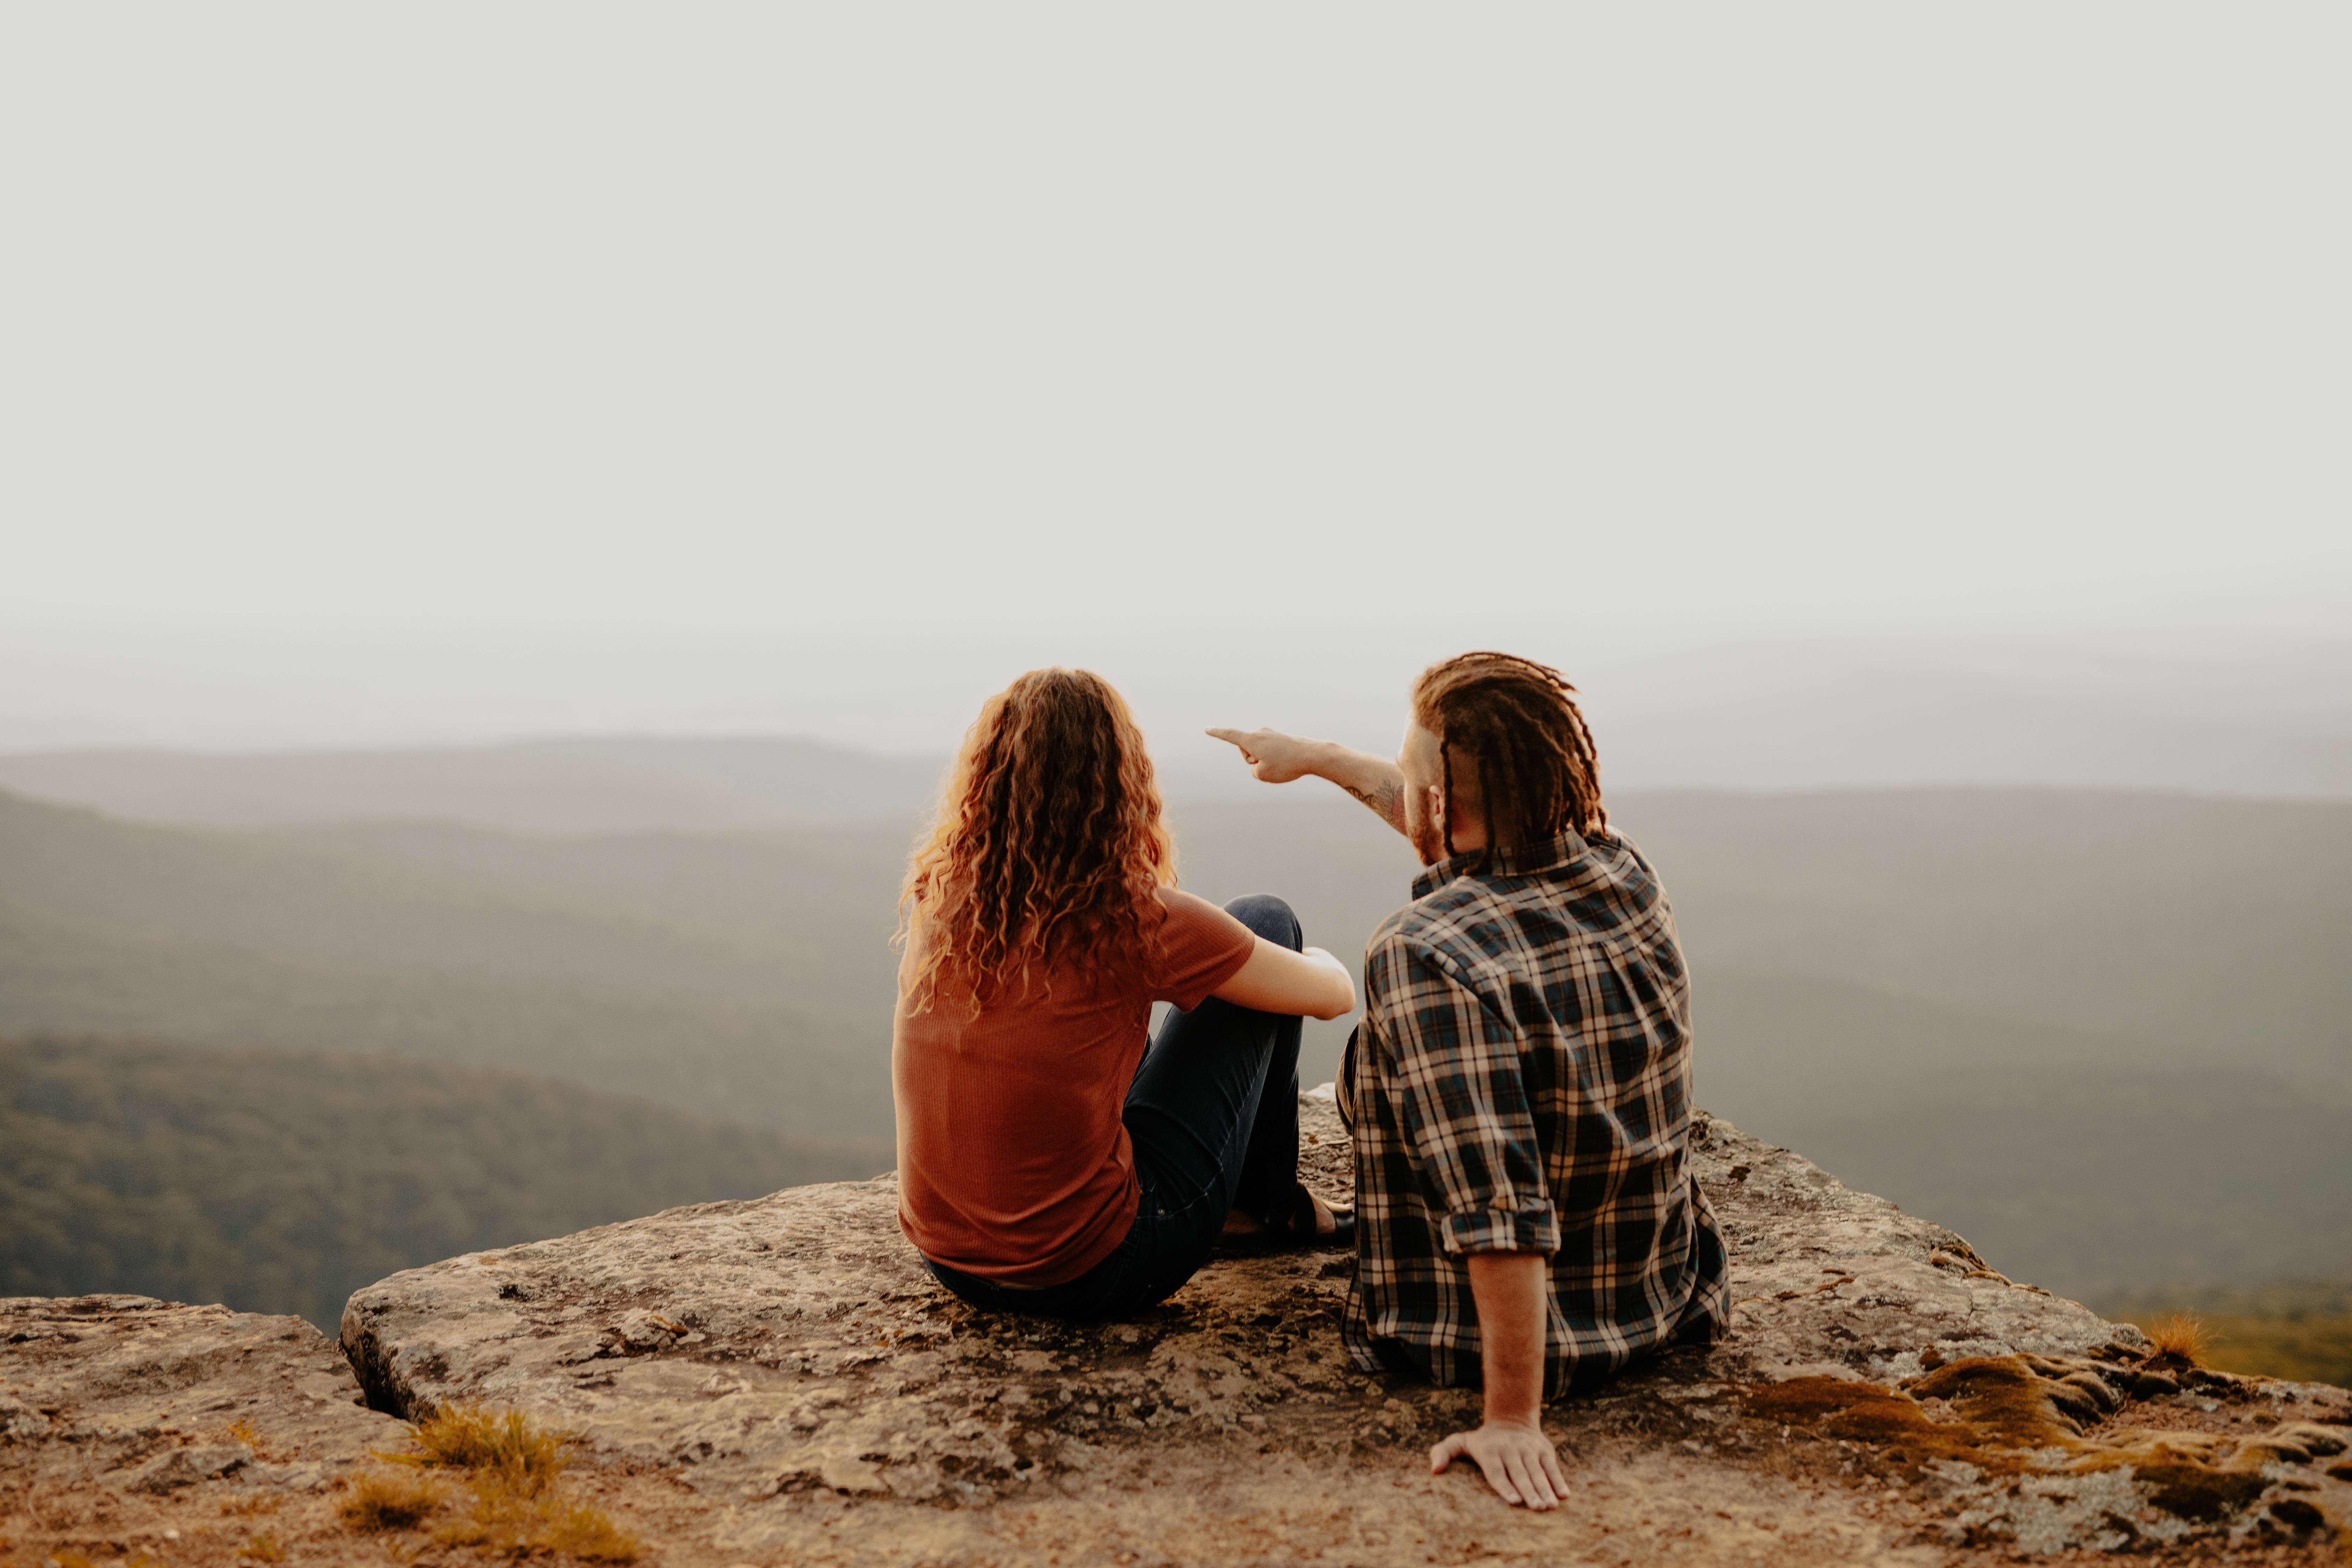 A couple sitting on a cliff. | Source: Unsplash